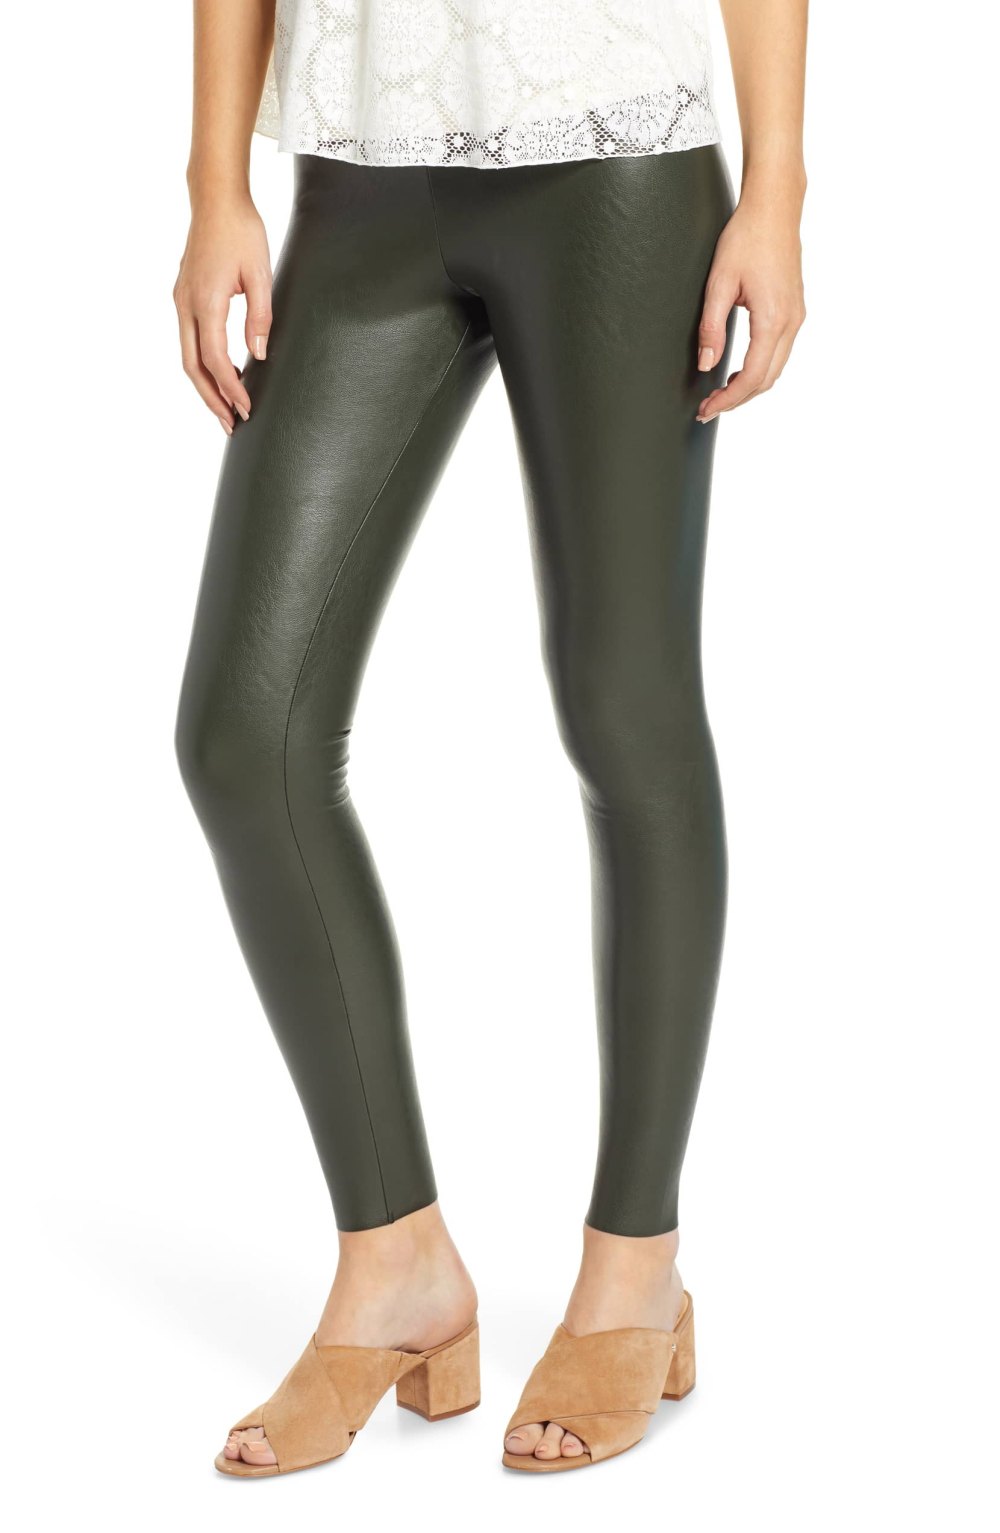 The Faux Leather Leggings We're Never Taking Off